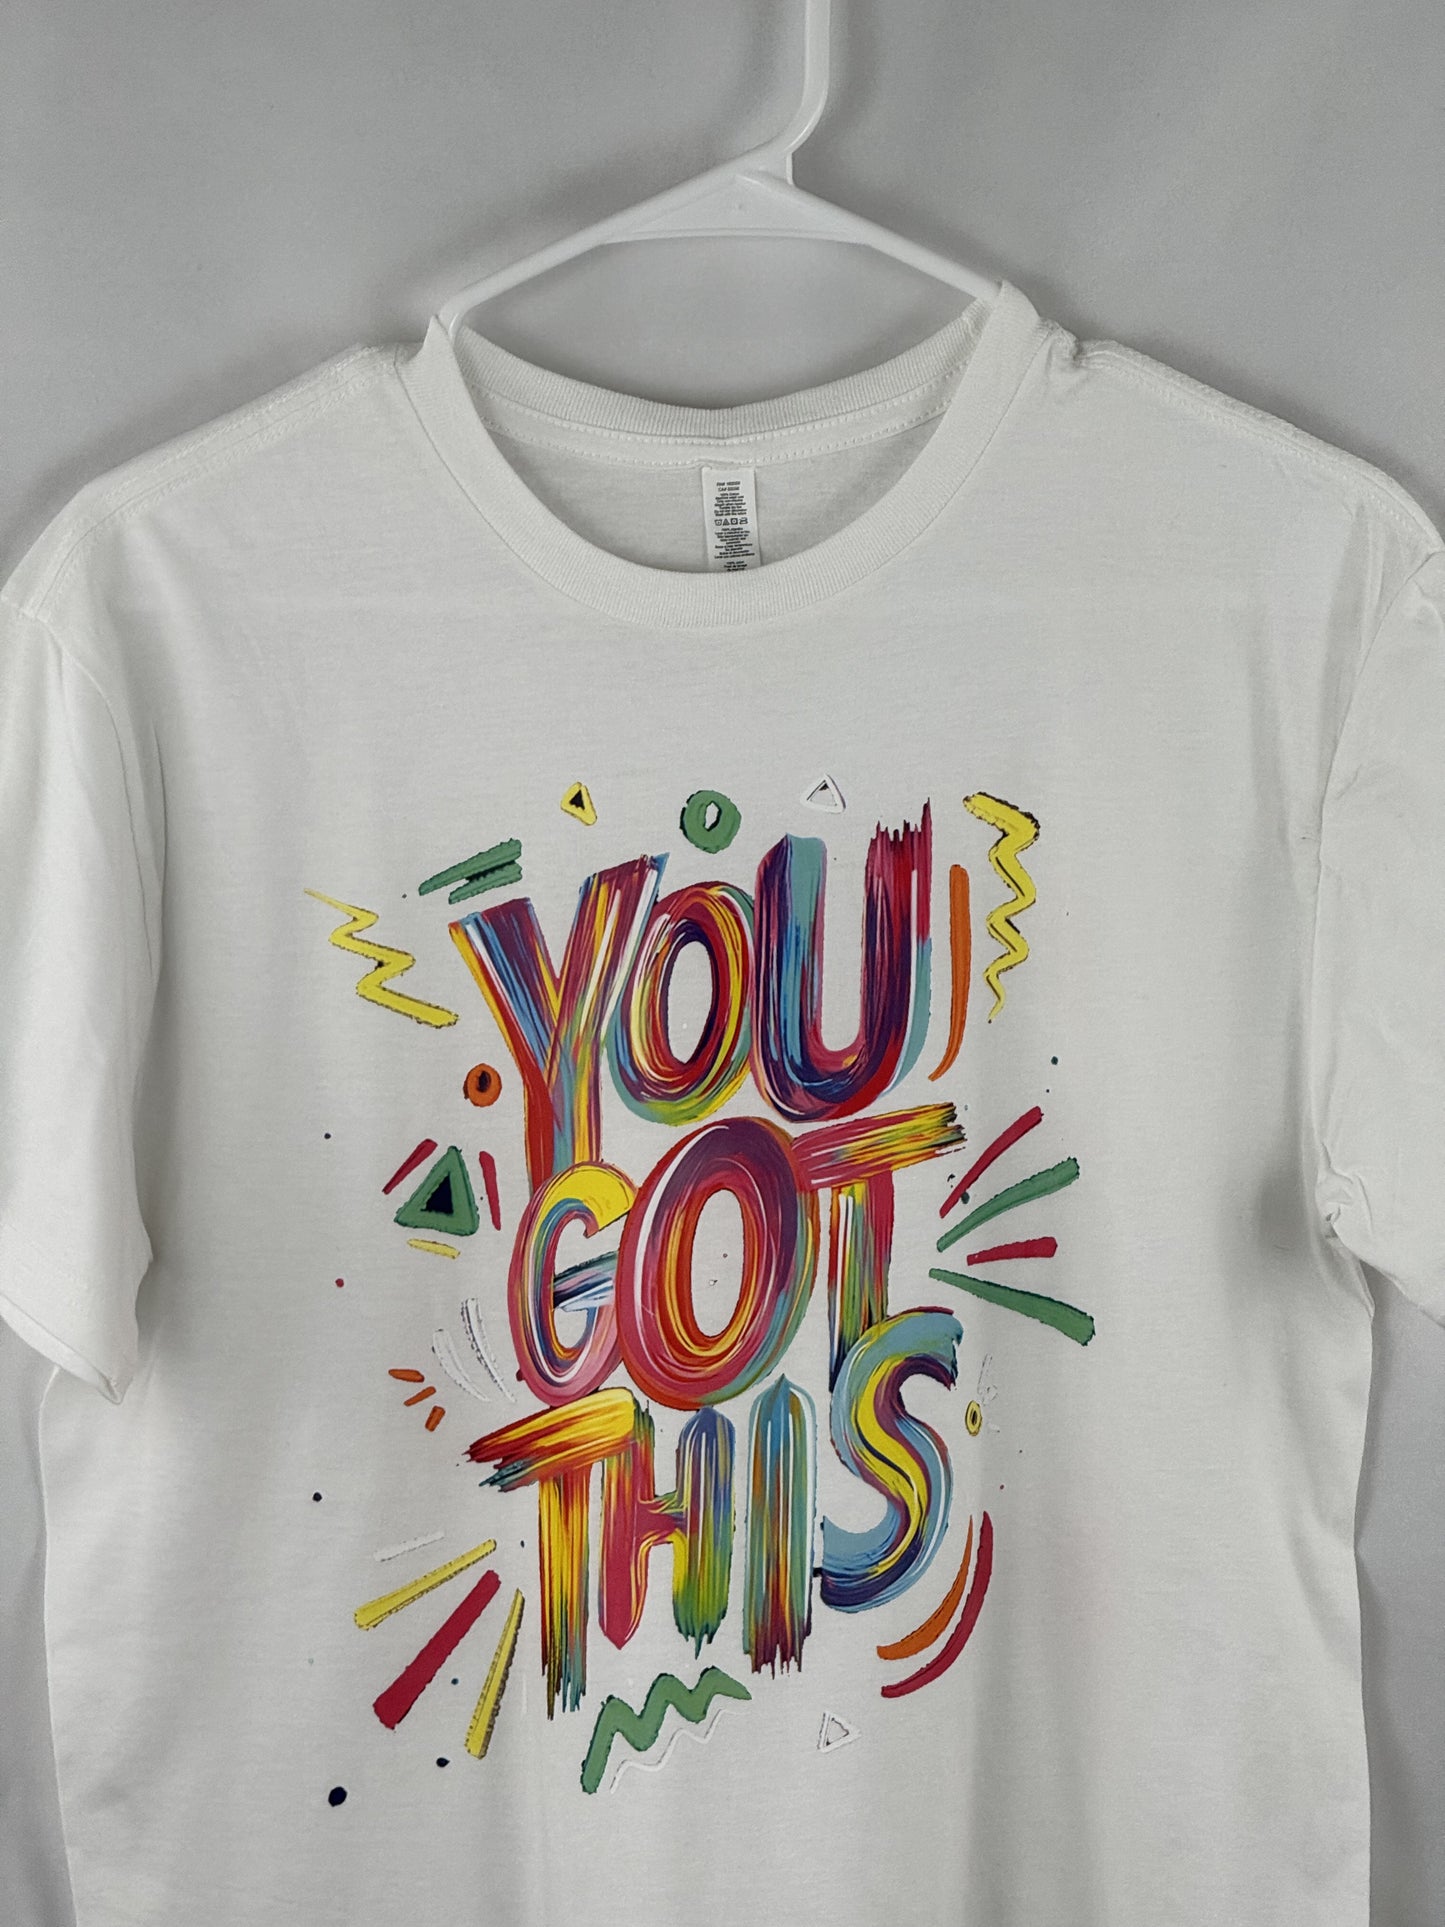 "YOU GOT THIS" Motivational Tee - Bold Affirmation from AdRa Apparel